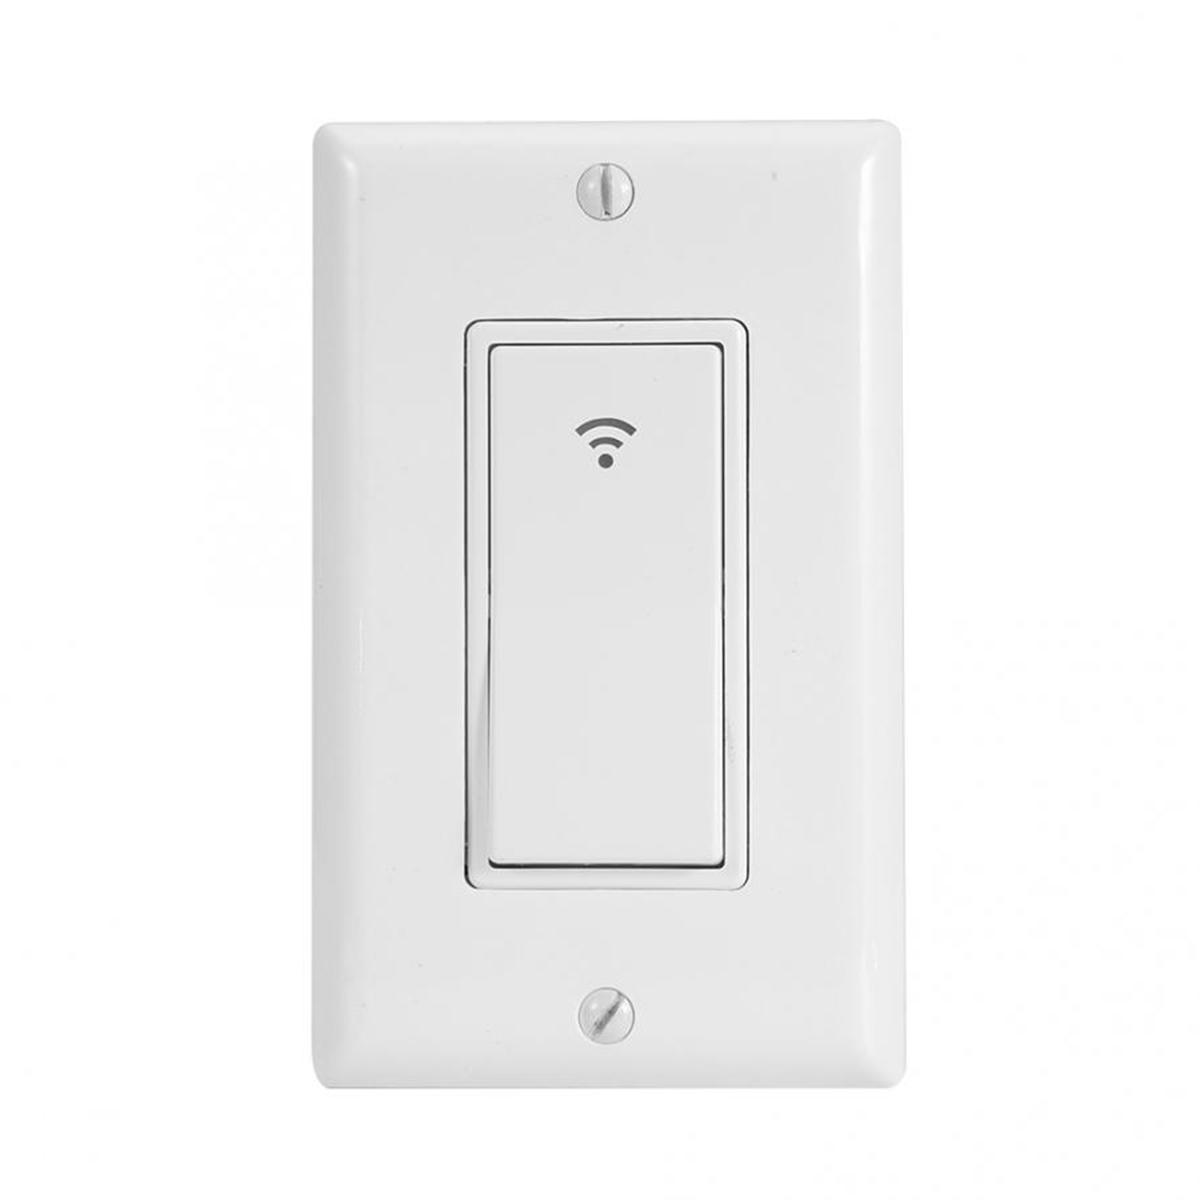 

WiFi Smart Wall Light Wireless Touch Panel Switch App Timing for Alexa Google Home Remote Control